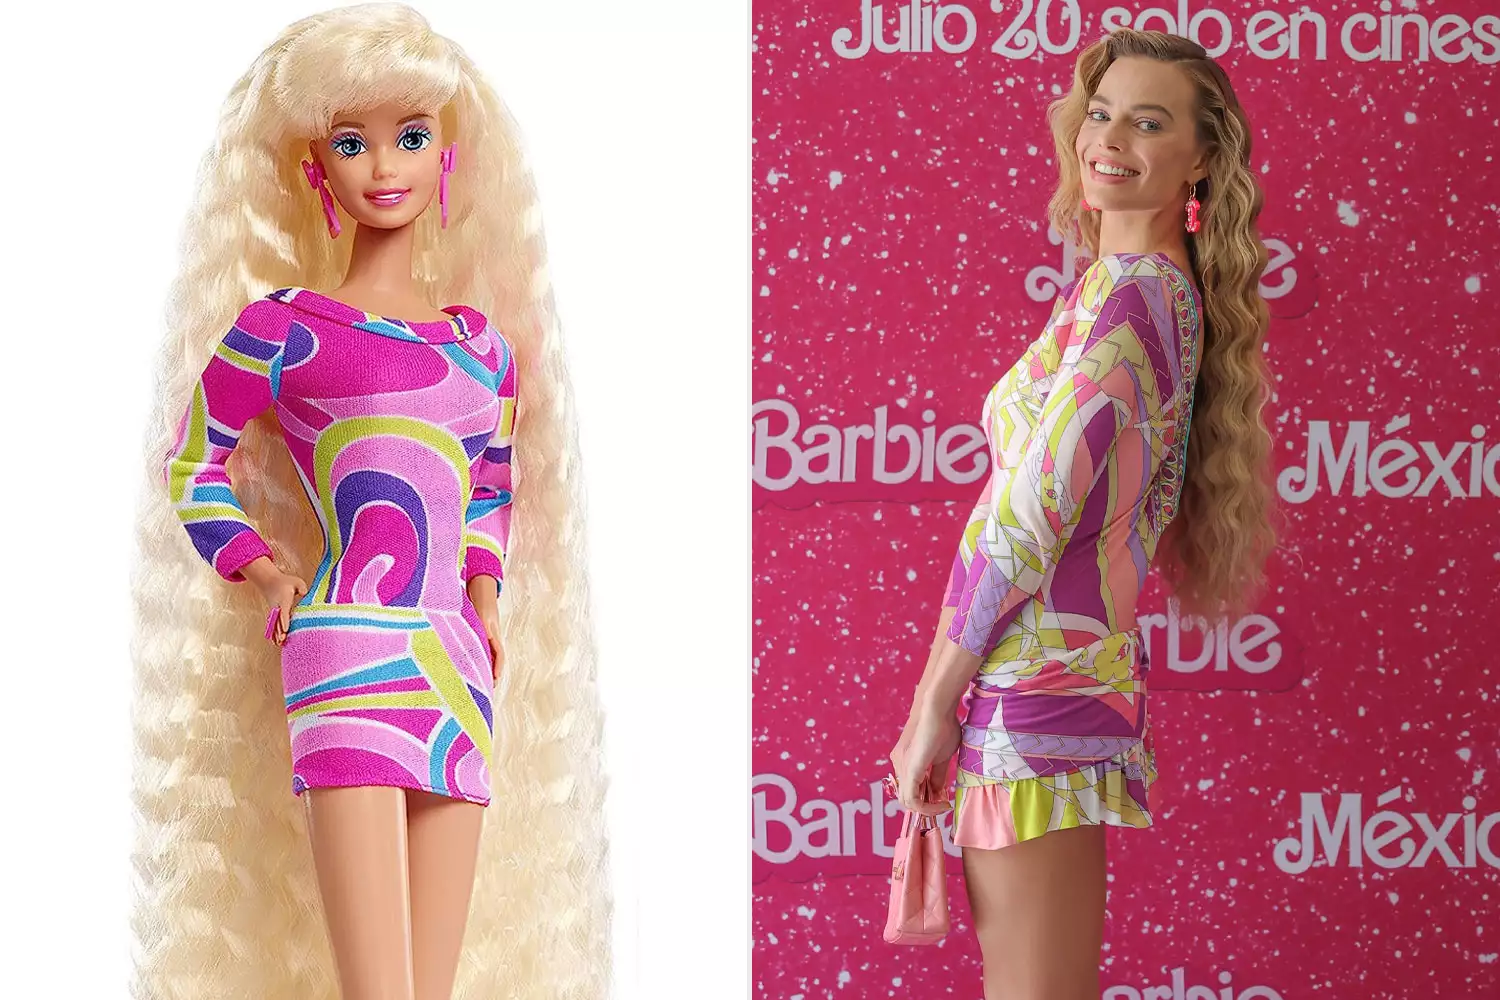 Margot Robbie Debuts Crimped Hairstyle as 'Totally Hair' Barbie 37